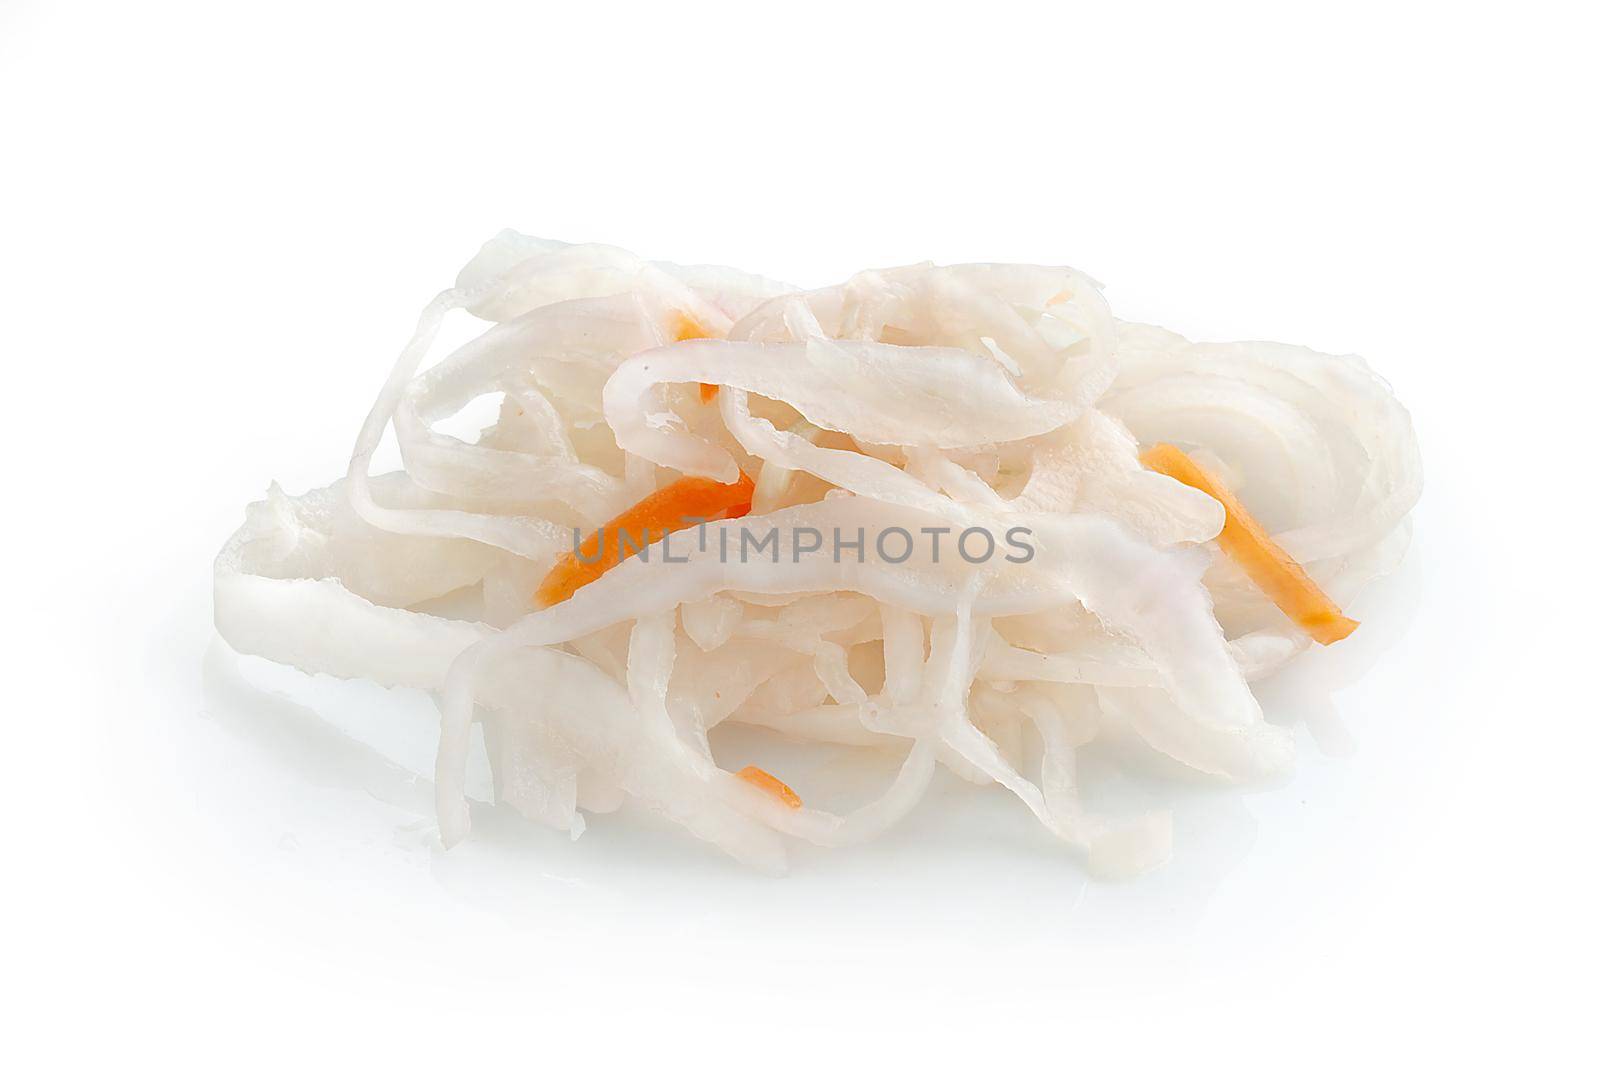 Isolated handful of sauerkraut with carrot on the white background